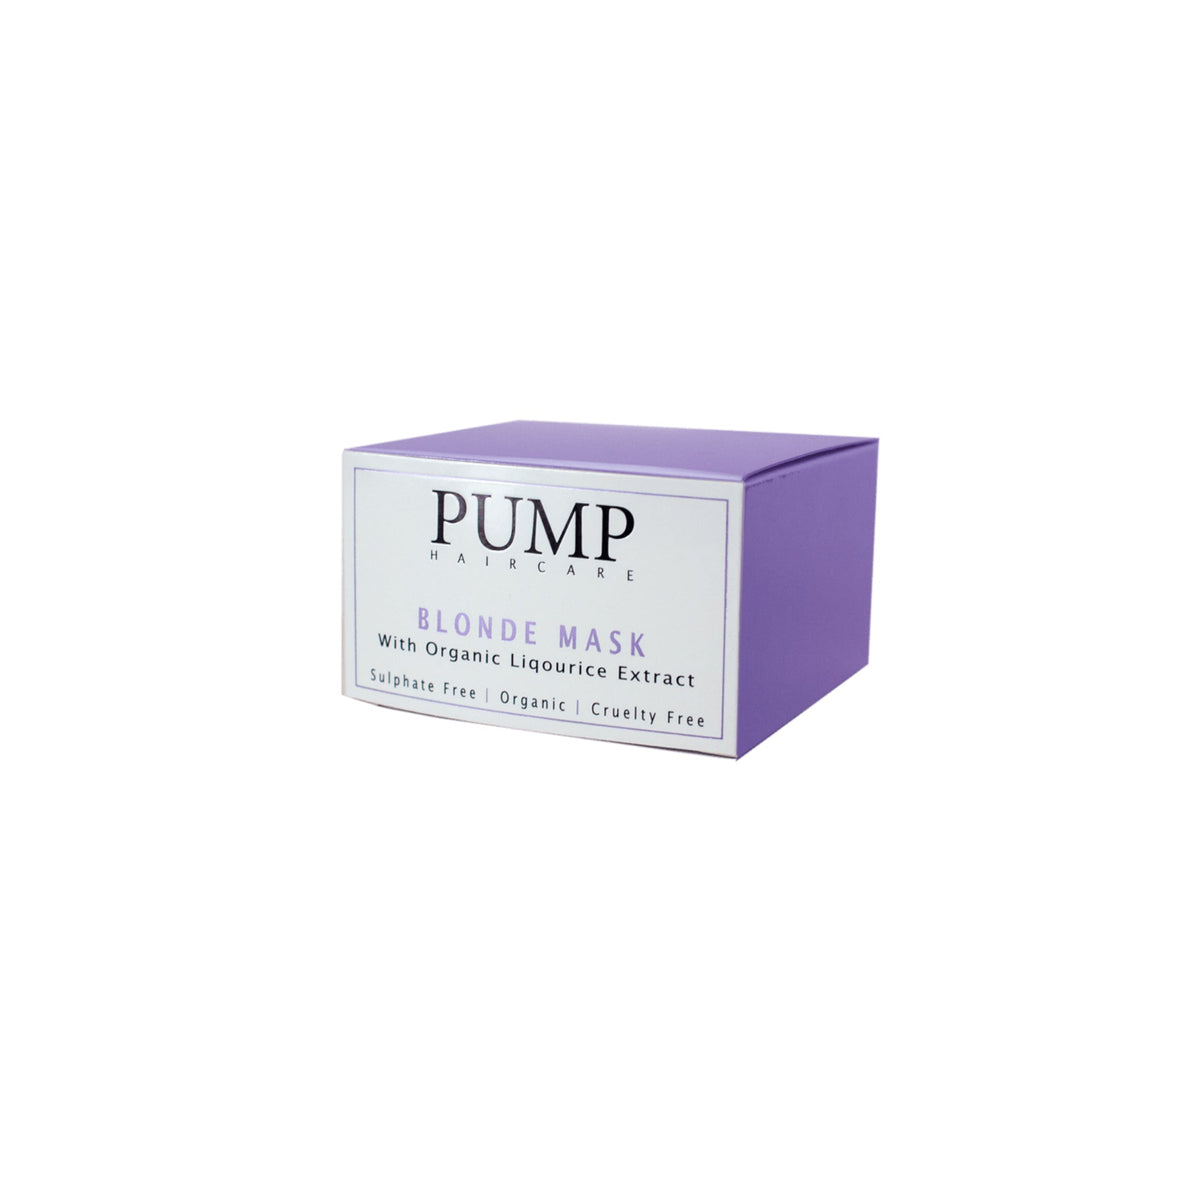 Pump Blonde Hair Mask - Haircare Superstore